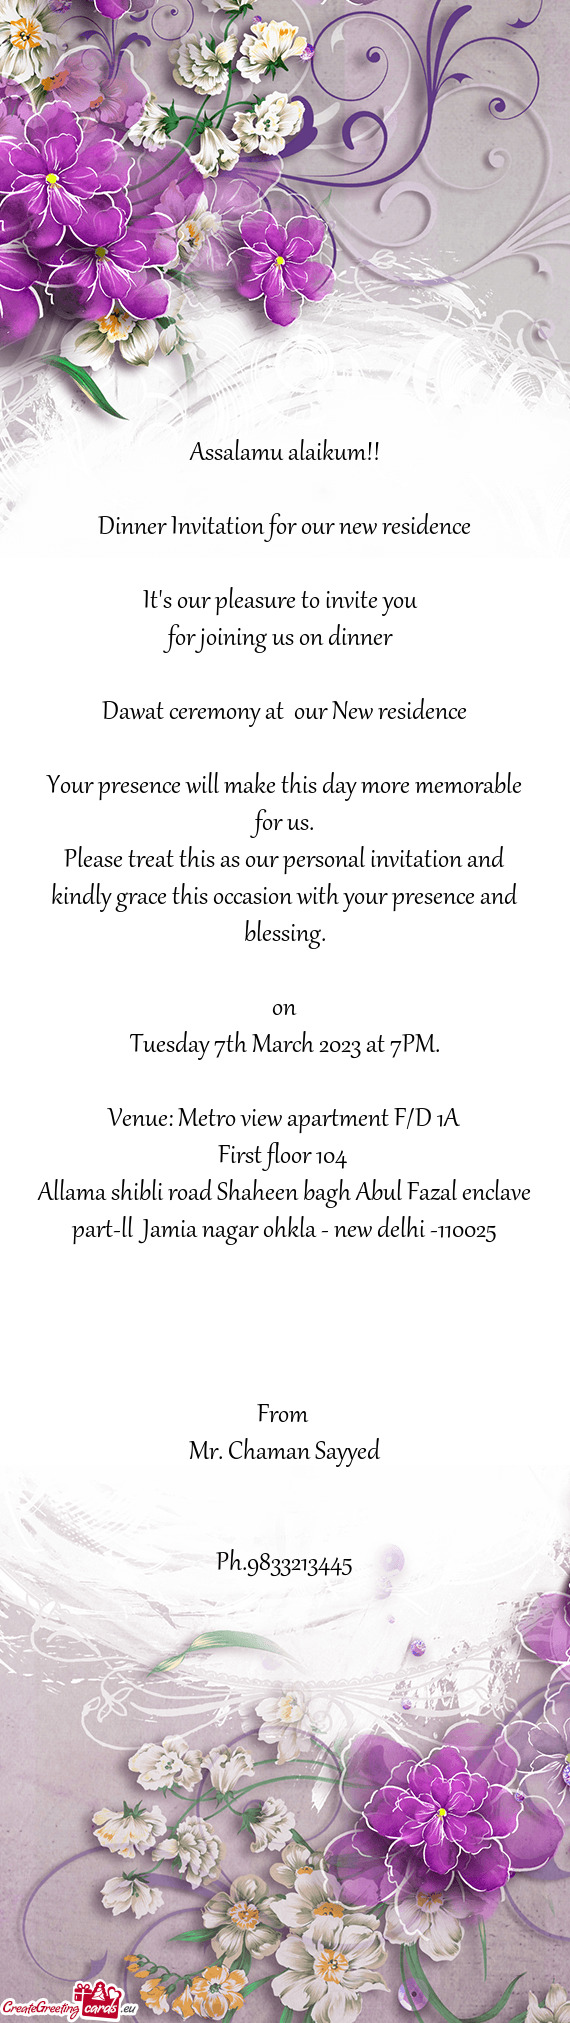 Dawat ceremony at our New residence